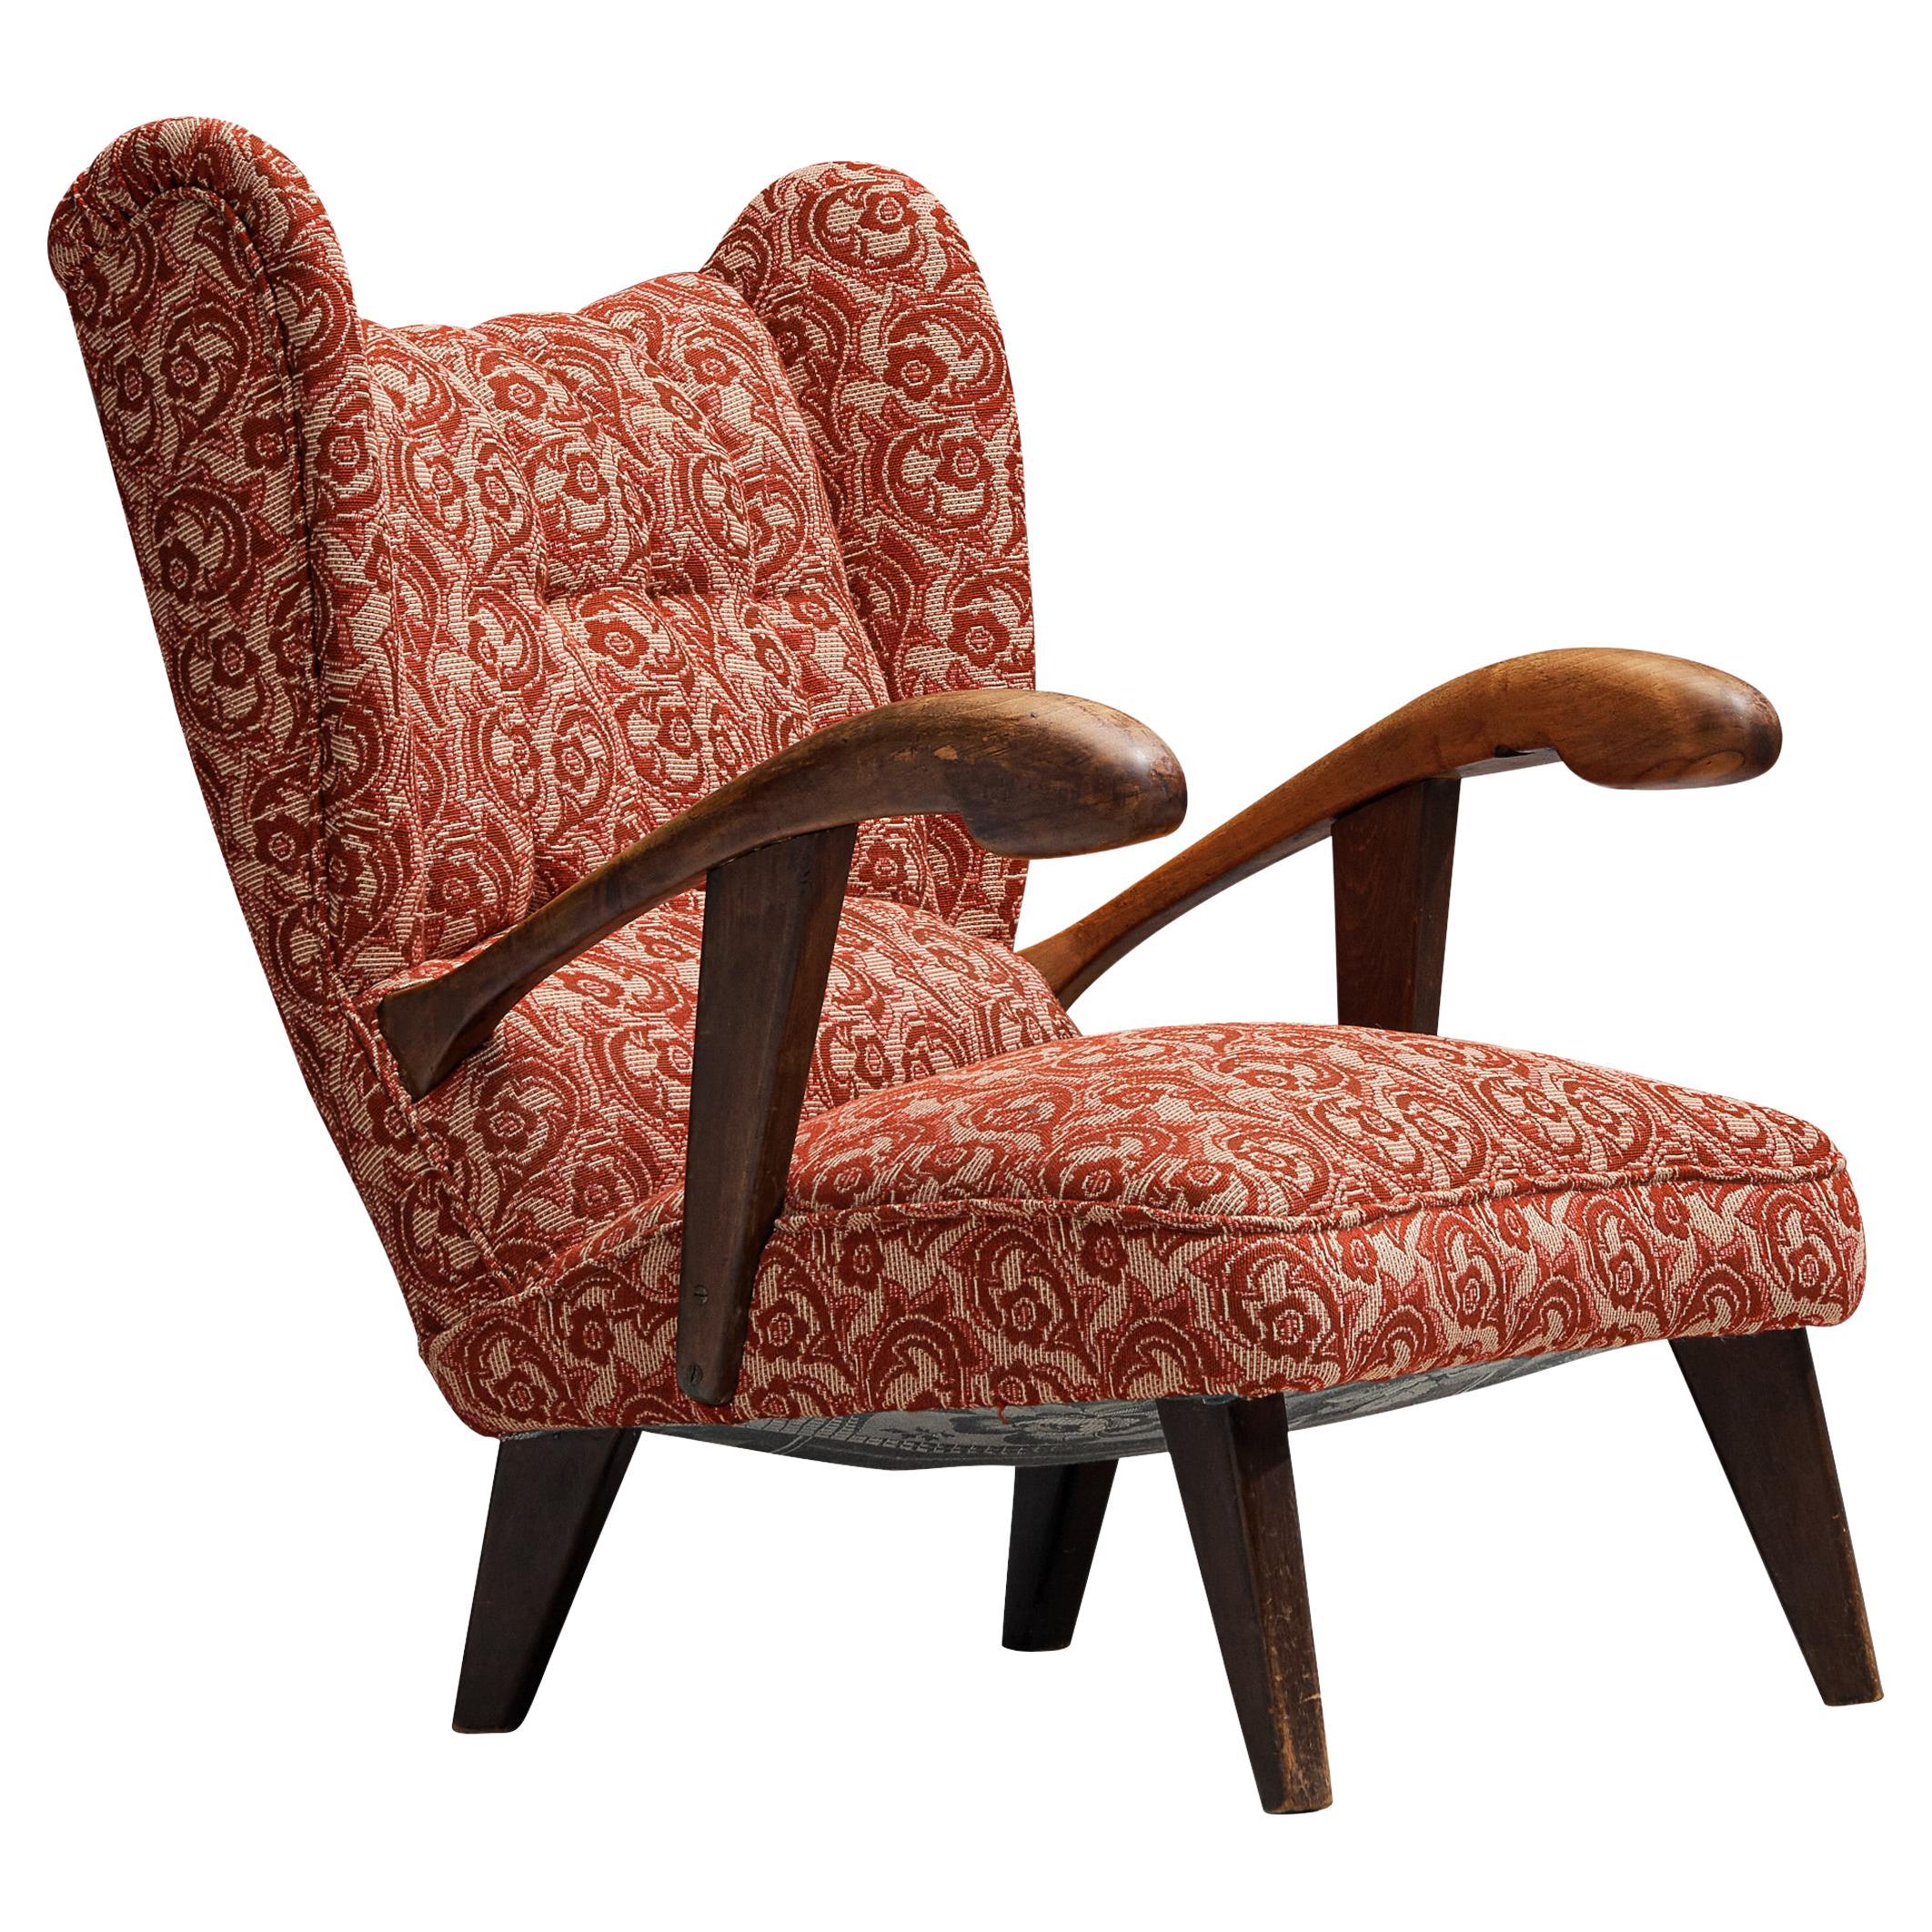 Sculpted Lounge Chair in Red Floral Upholstery and Walnut